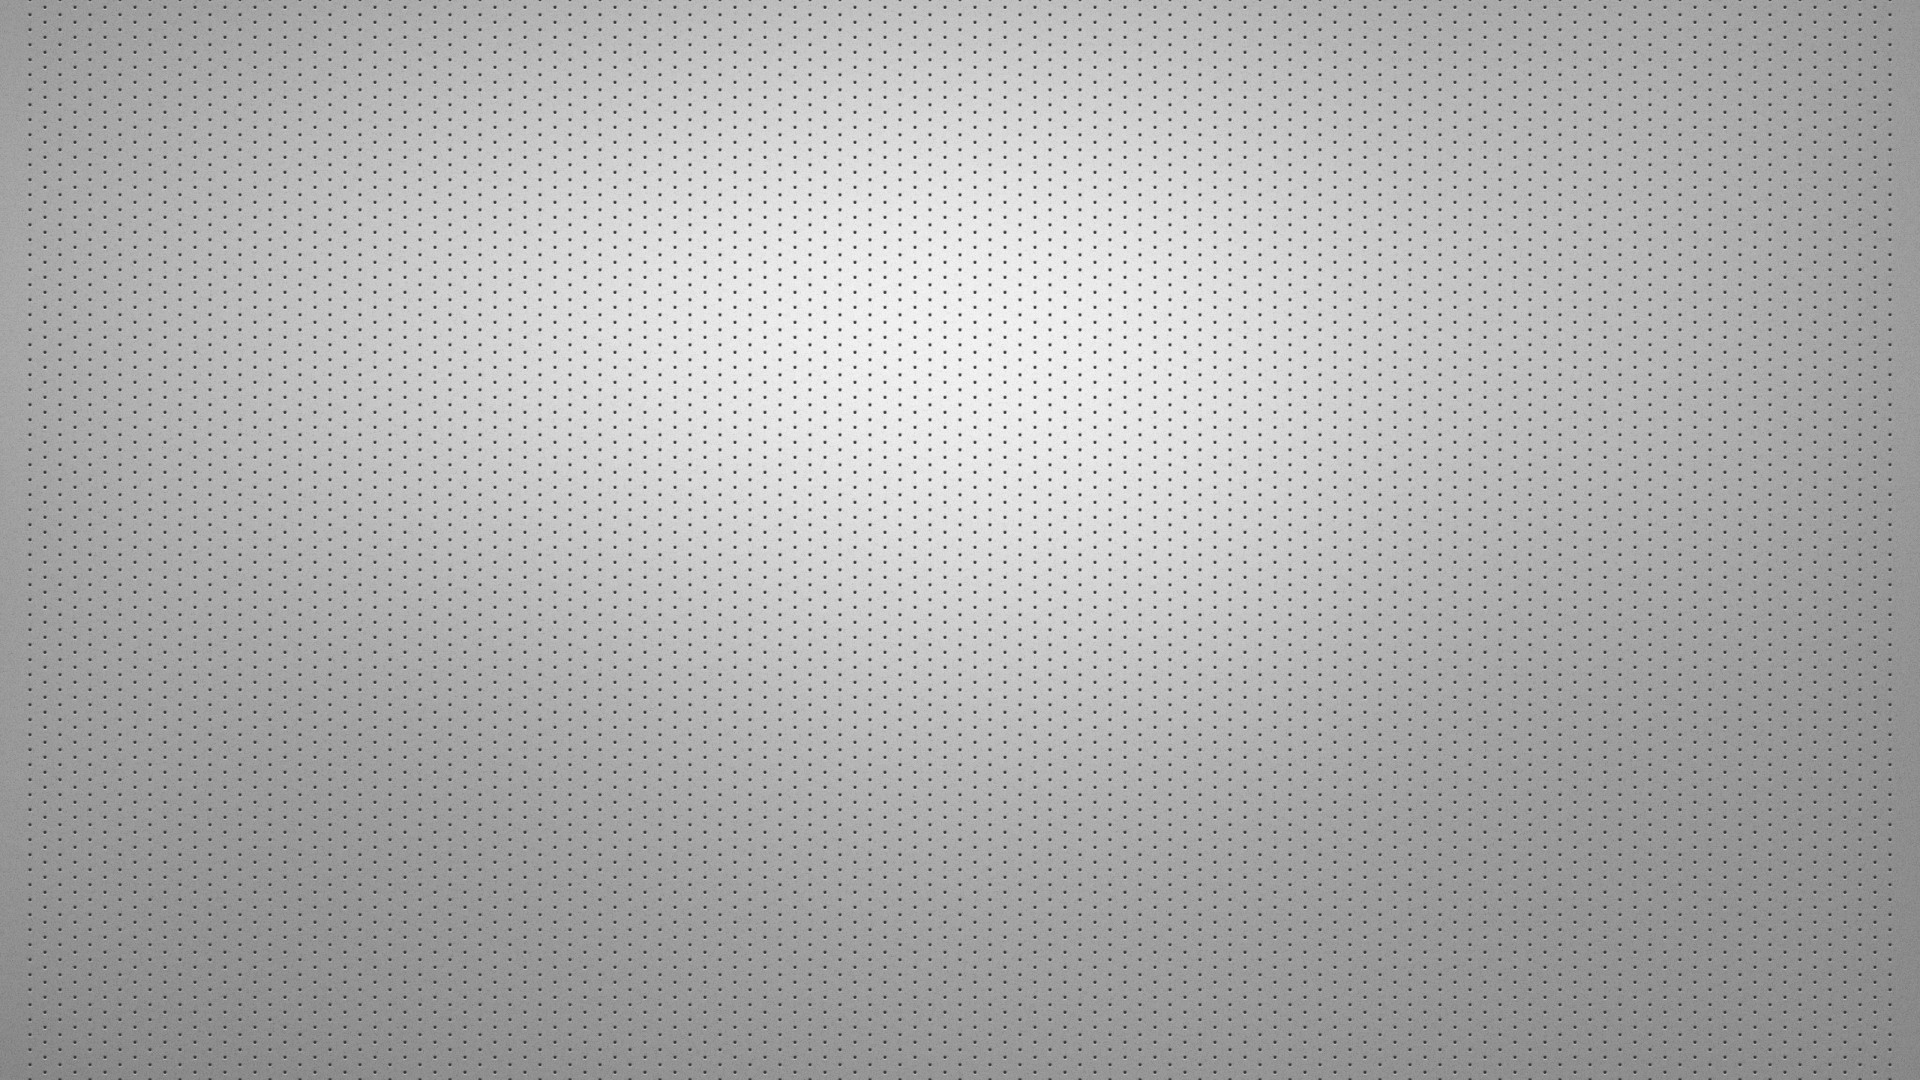 1920x1080 Mesh points background silver wallpapers HD.